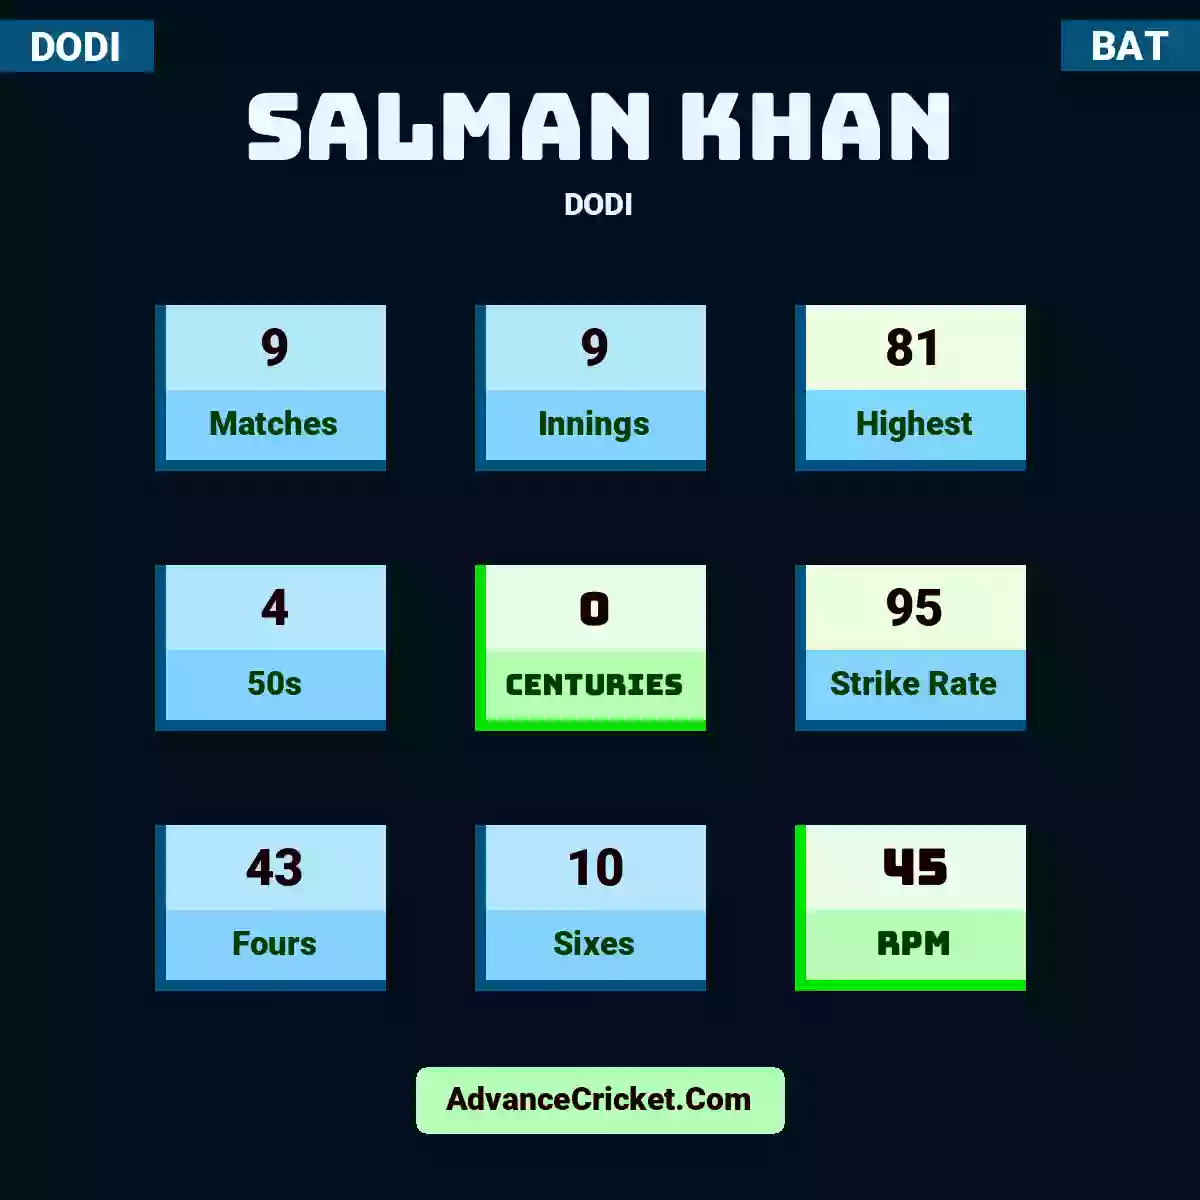 Salman Khan DODI , Salman Khan played 9 matches, scored 81 runs as highest, 4 half-centuries, and 0 centuries, with a strike rate of 95. S.Khan hit 43 fours and 10 sixes, with an RPM of 45.